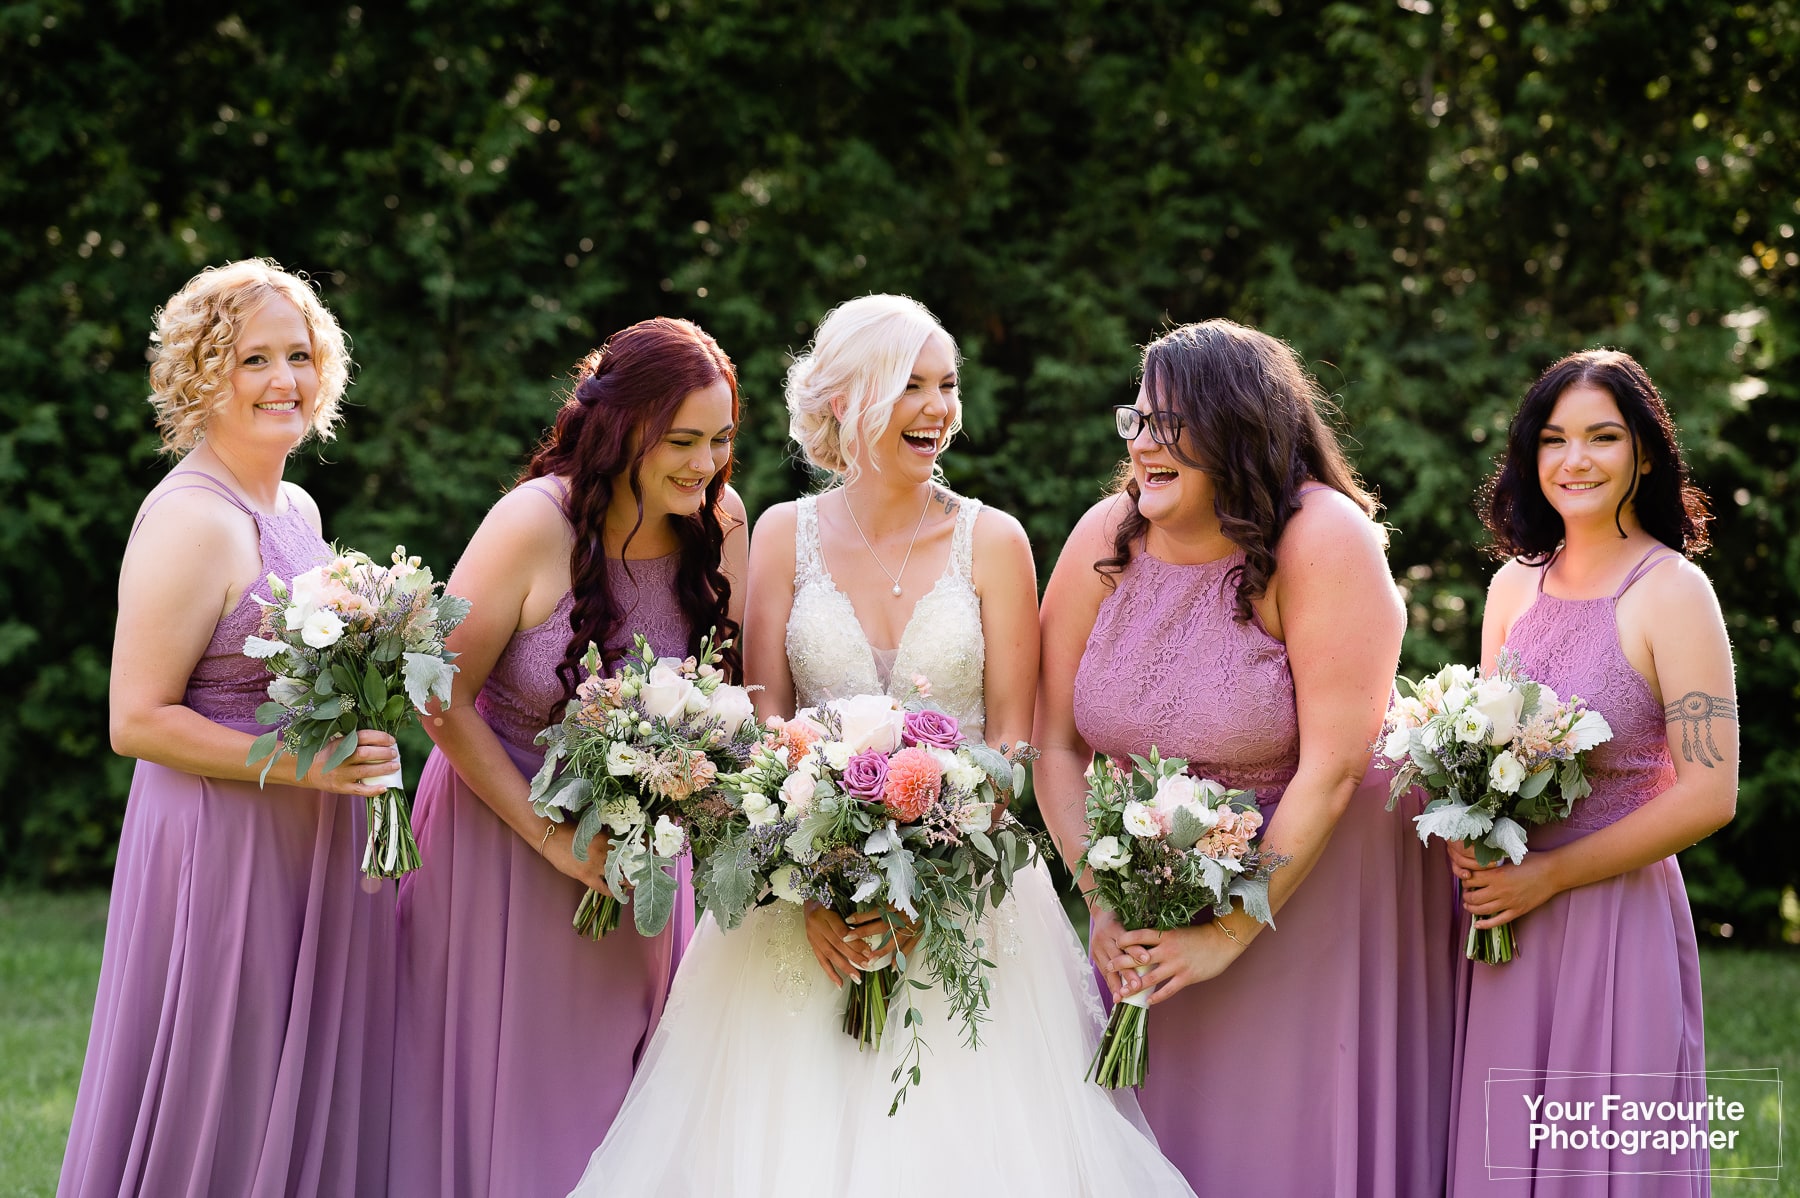 Candid bridesmaids laughing together